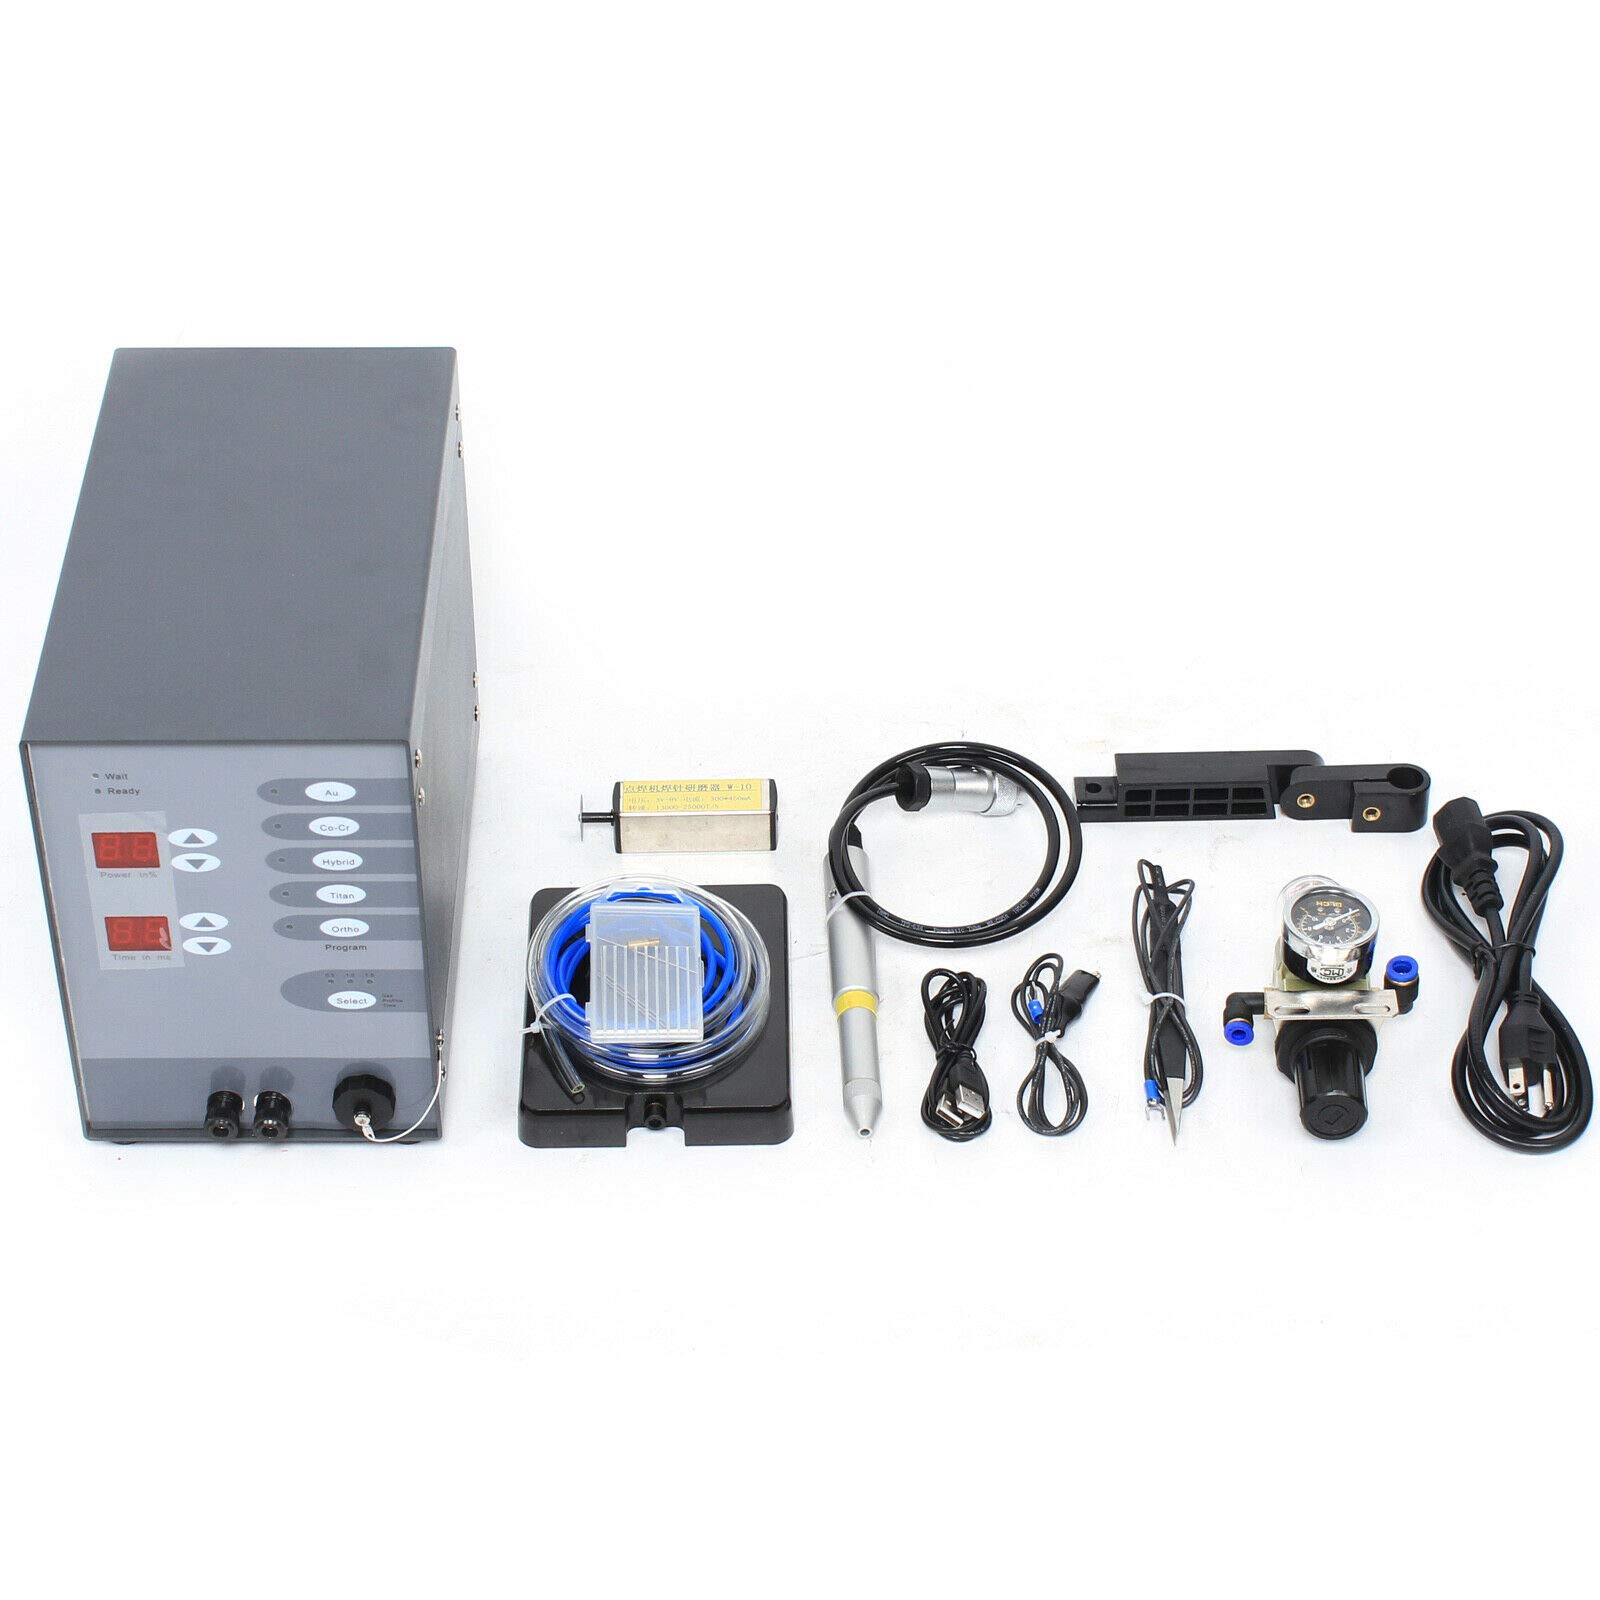 100W Automatic CNC Pulse Argon Spot Welder, Repair ARC Laser Machine Soldering Kit Iron Kits Hot Station Electronics Repair Tools GDAE10 Torch Welding Accessories Jewelry DIY Tool